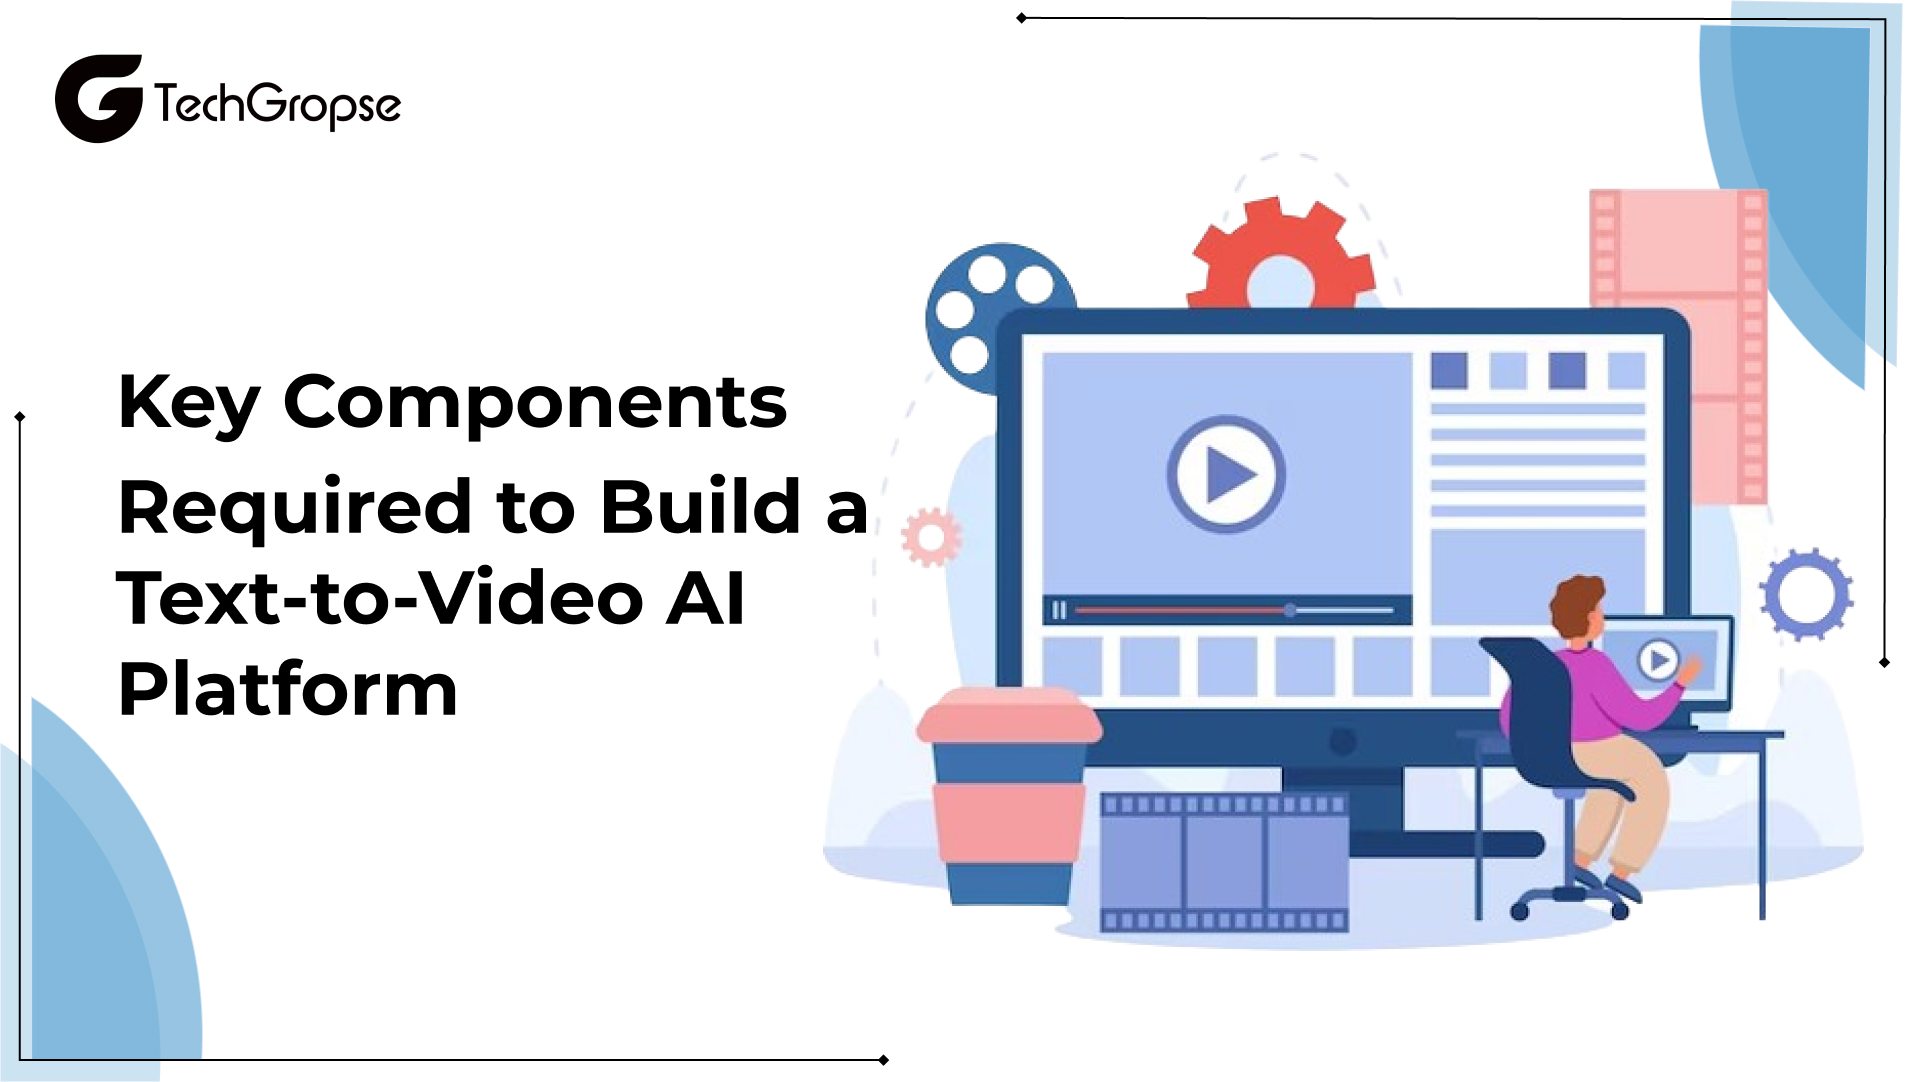 Key Components Required to Build a Text-to-Video AI Platform